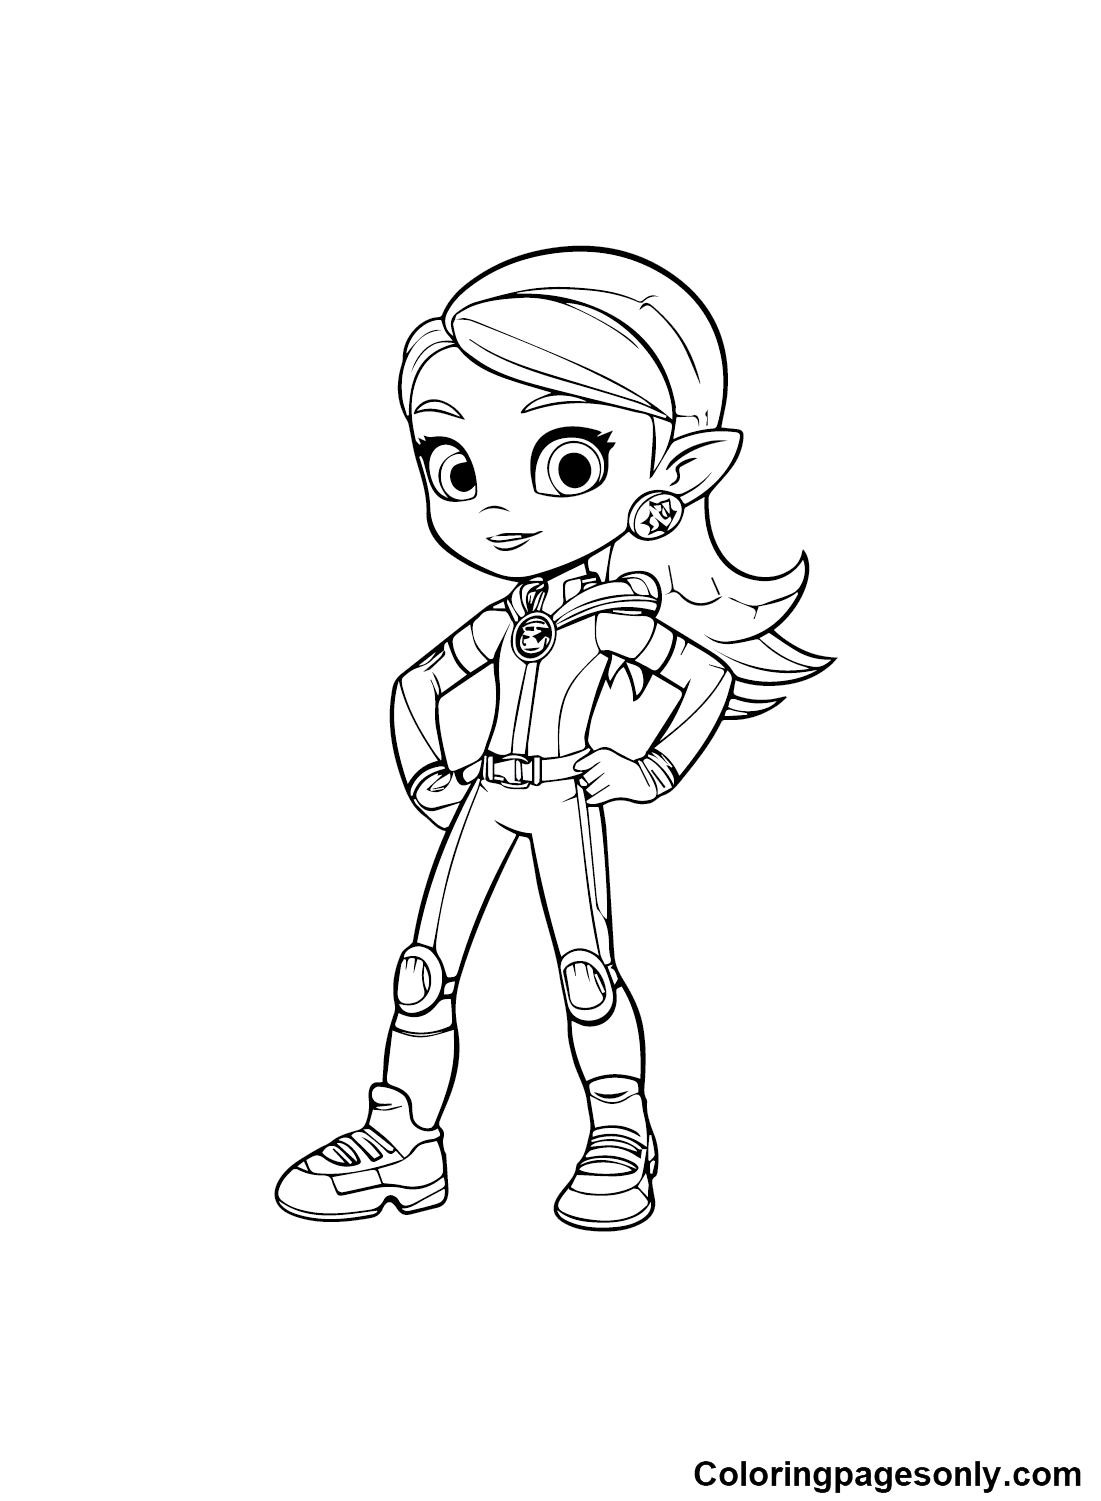 Rainbow Rangers Images to Print Coloring Page